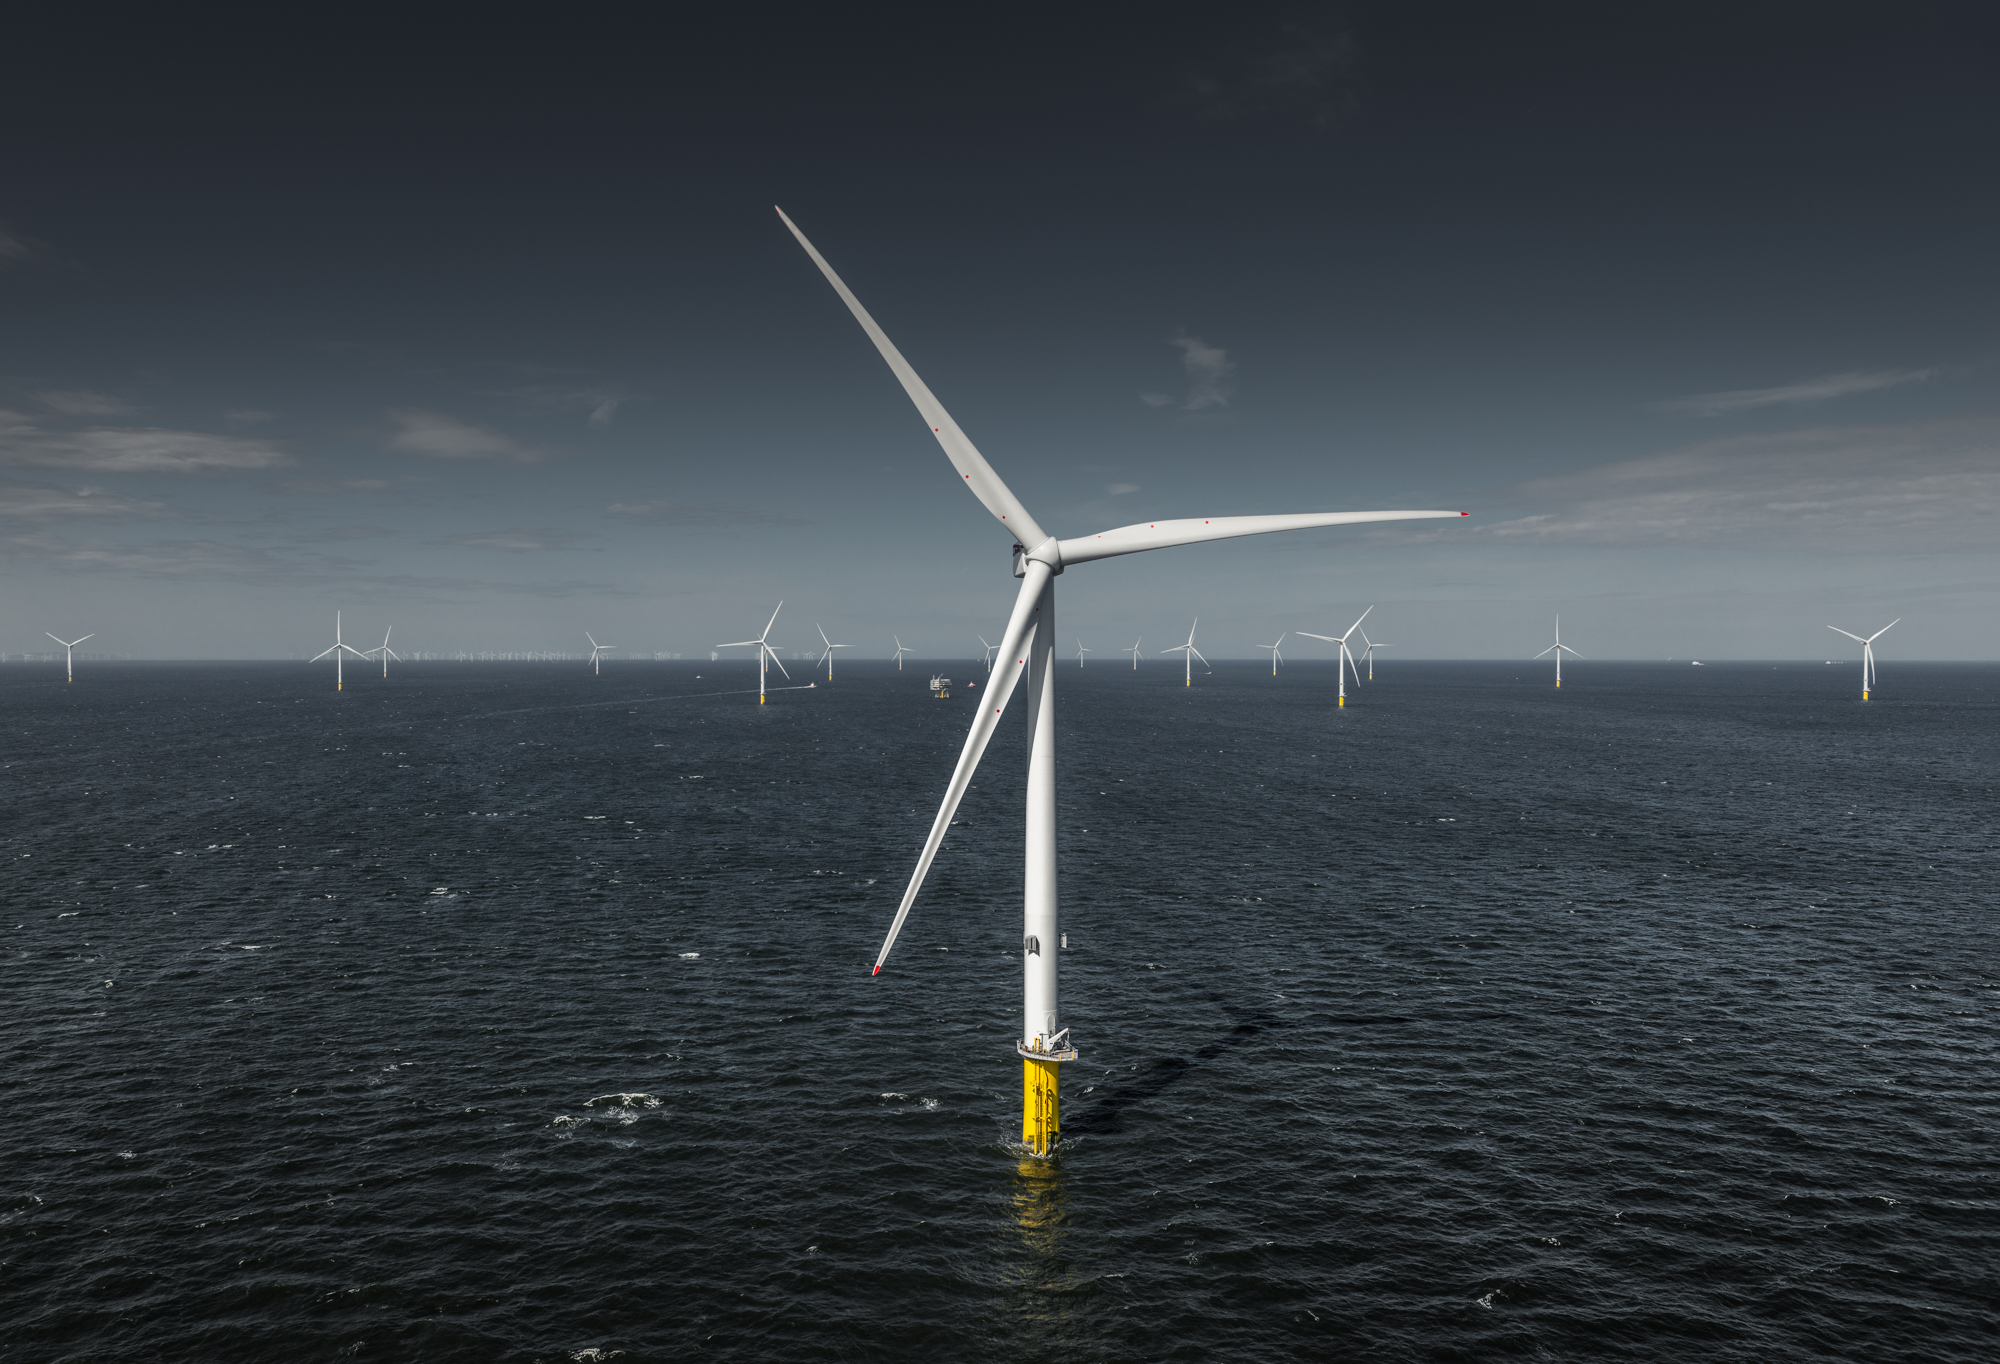 A photo of the UK Burbo Bank offshore wind farm